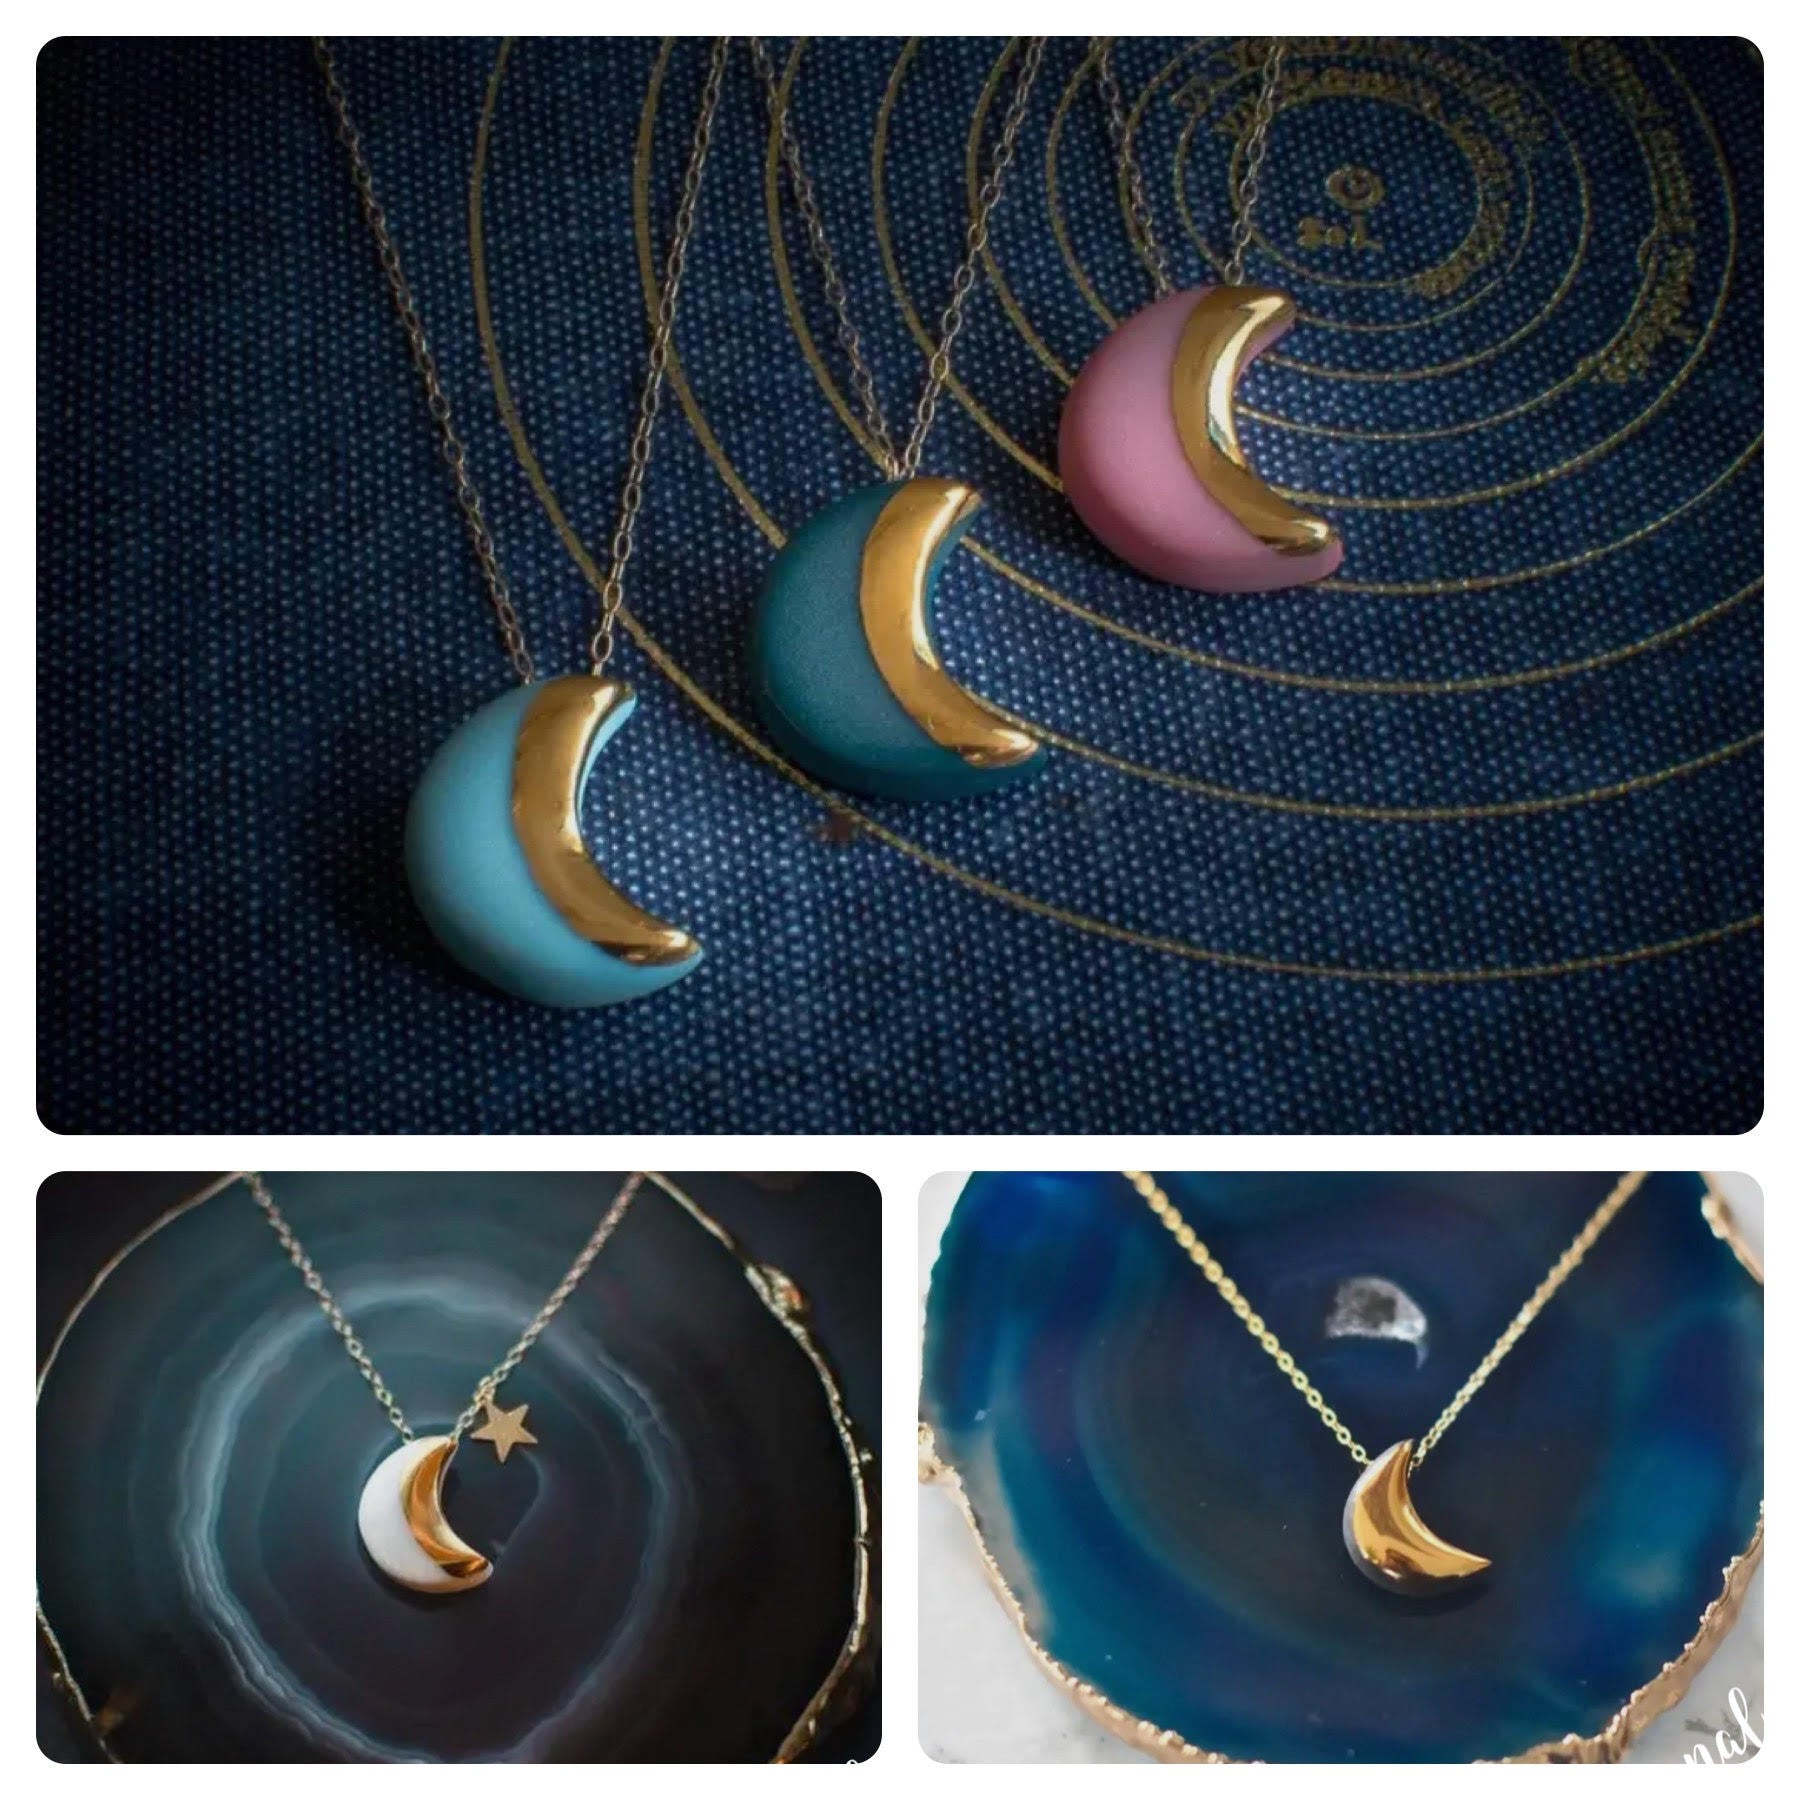 Cresent Moon Necklace by Danu